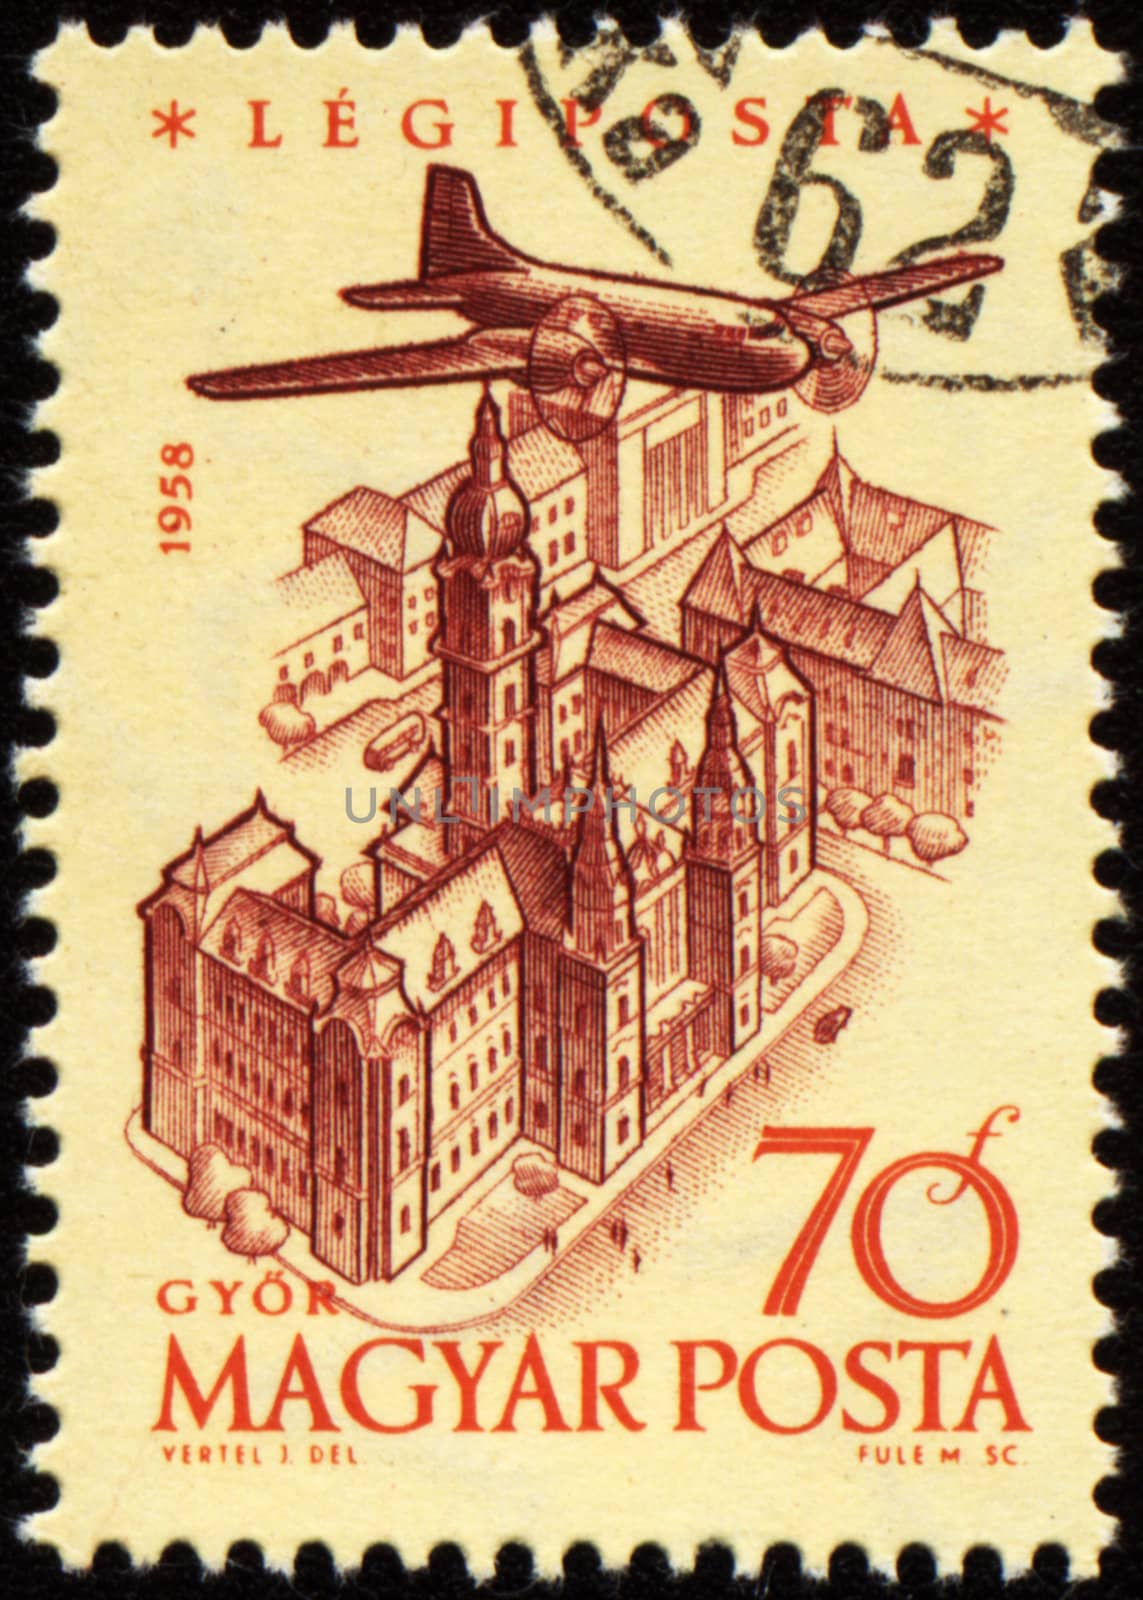 HUNGARY - CIRCA 1958: A stamp printed in Hungary shows flying plane over the Gyor town, series, circa 1958